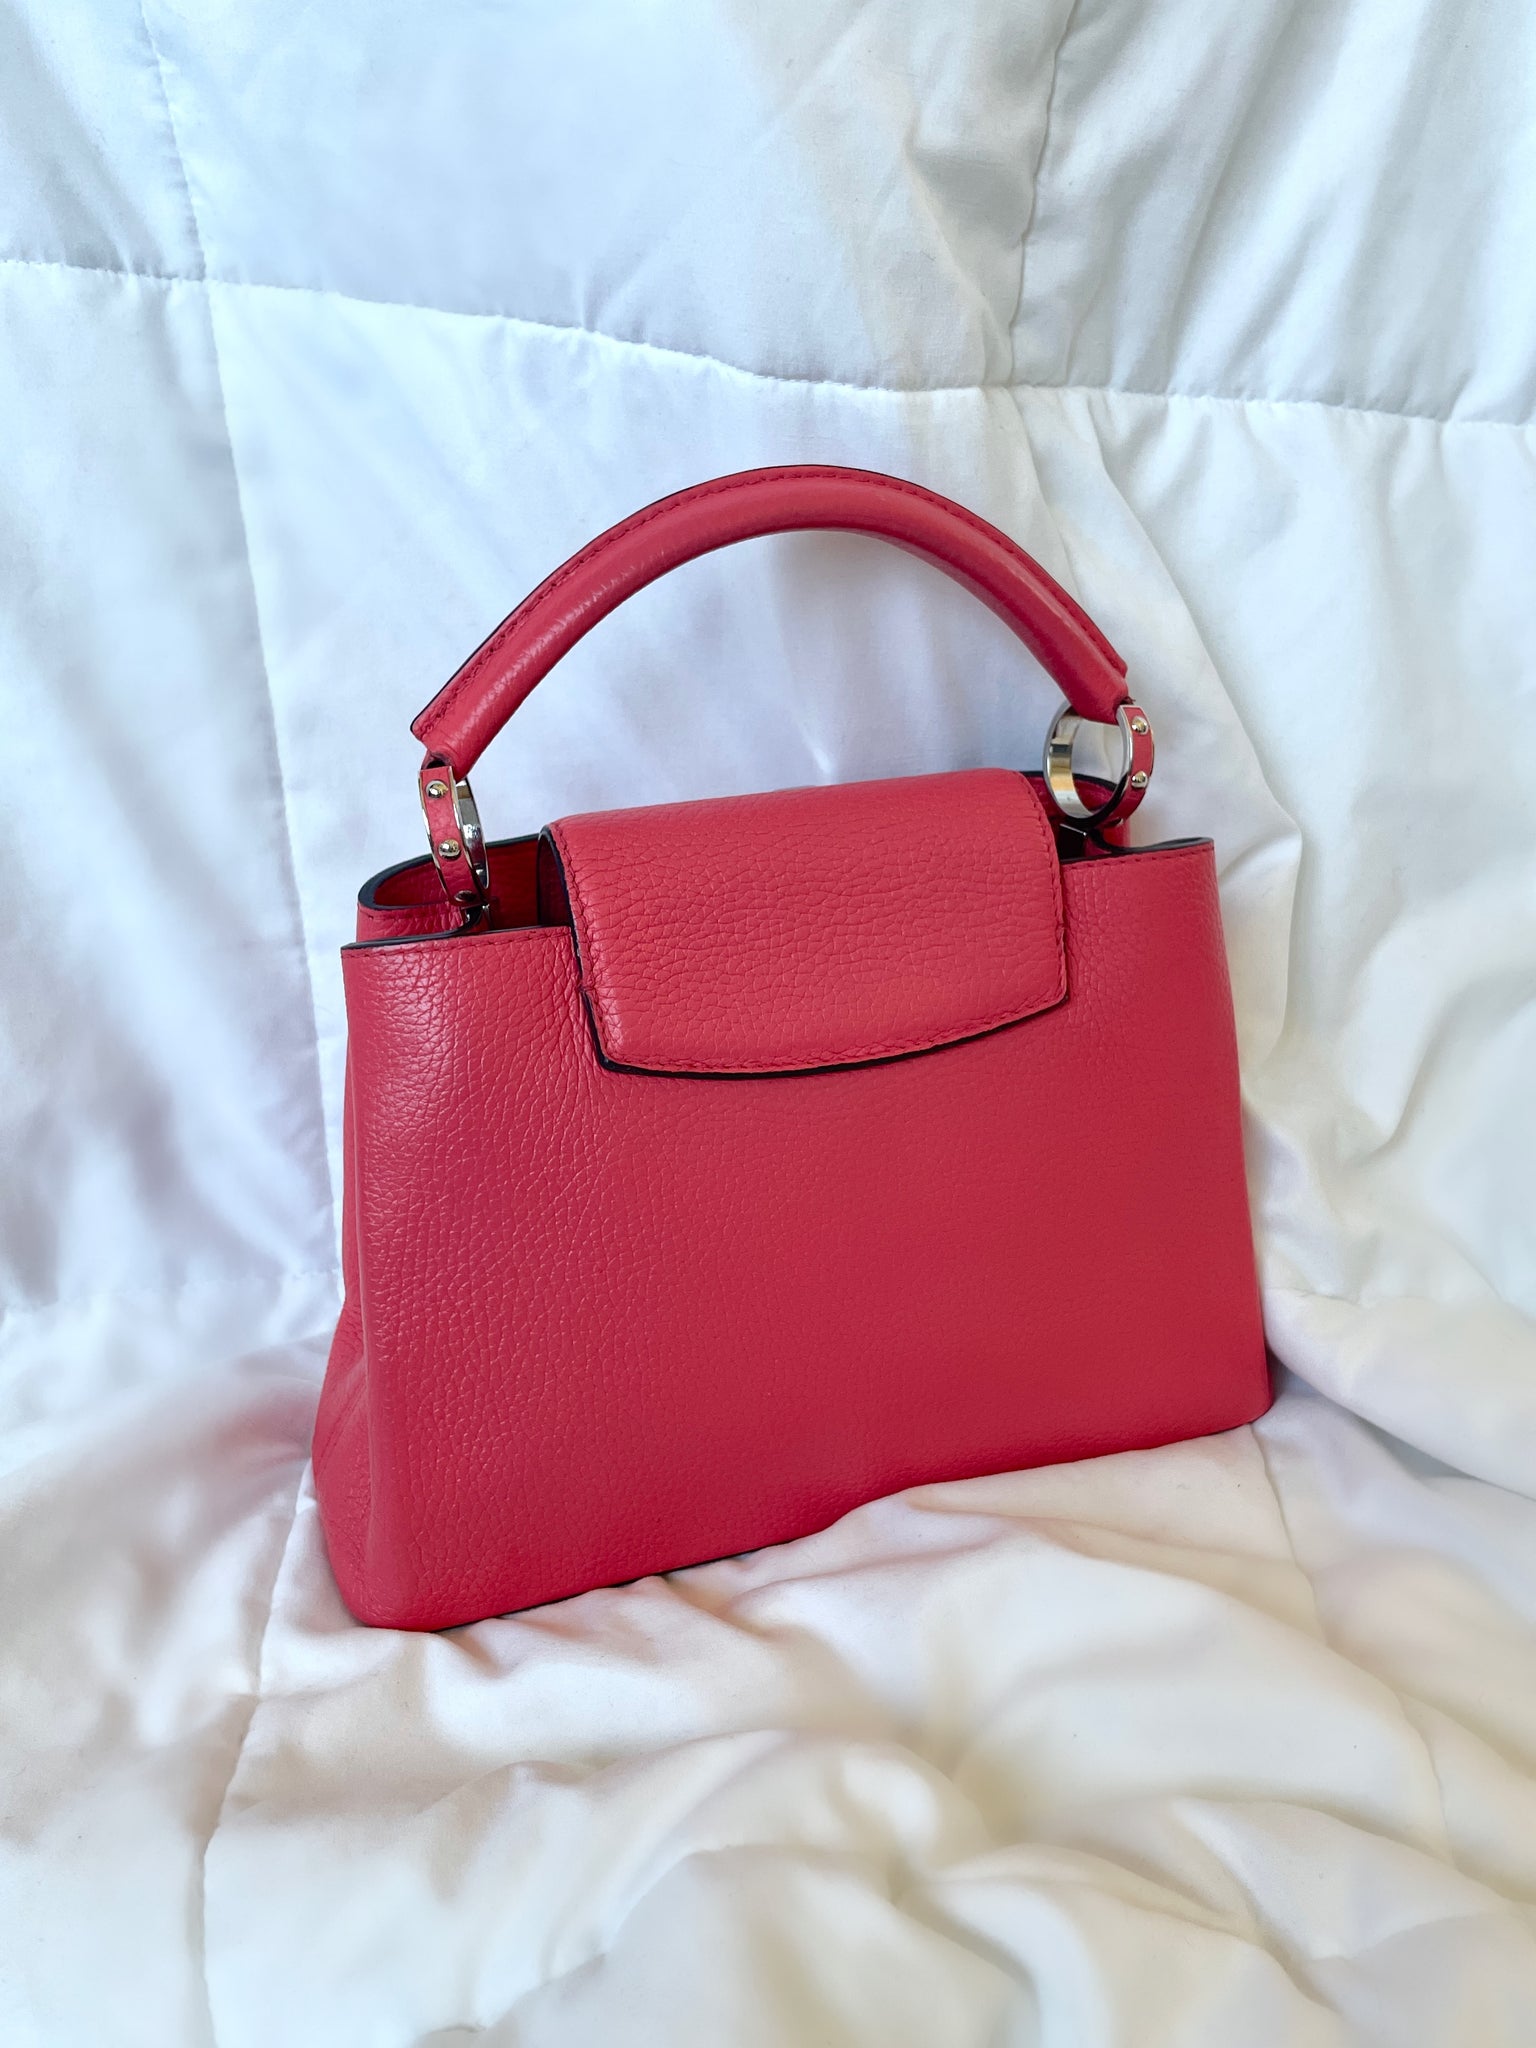 Louis Vuitton Red Taurillon Leather Capucines BB Top Handle Bag